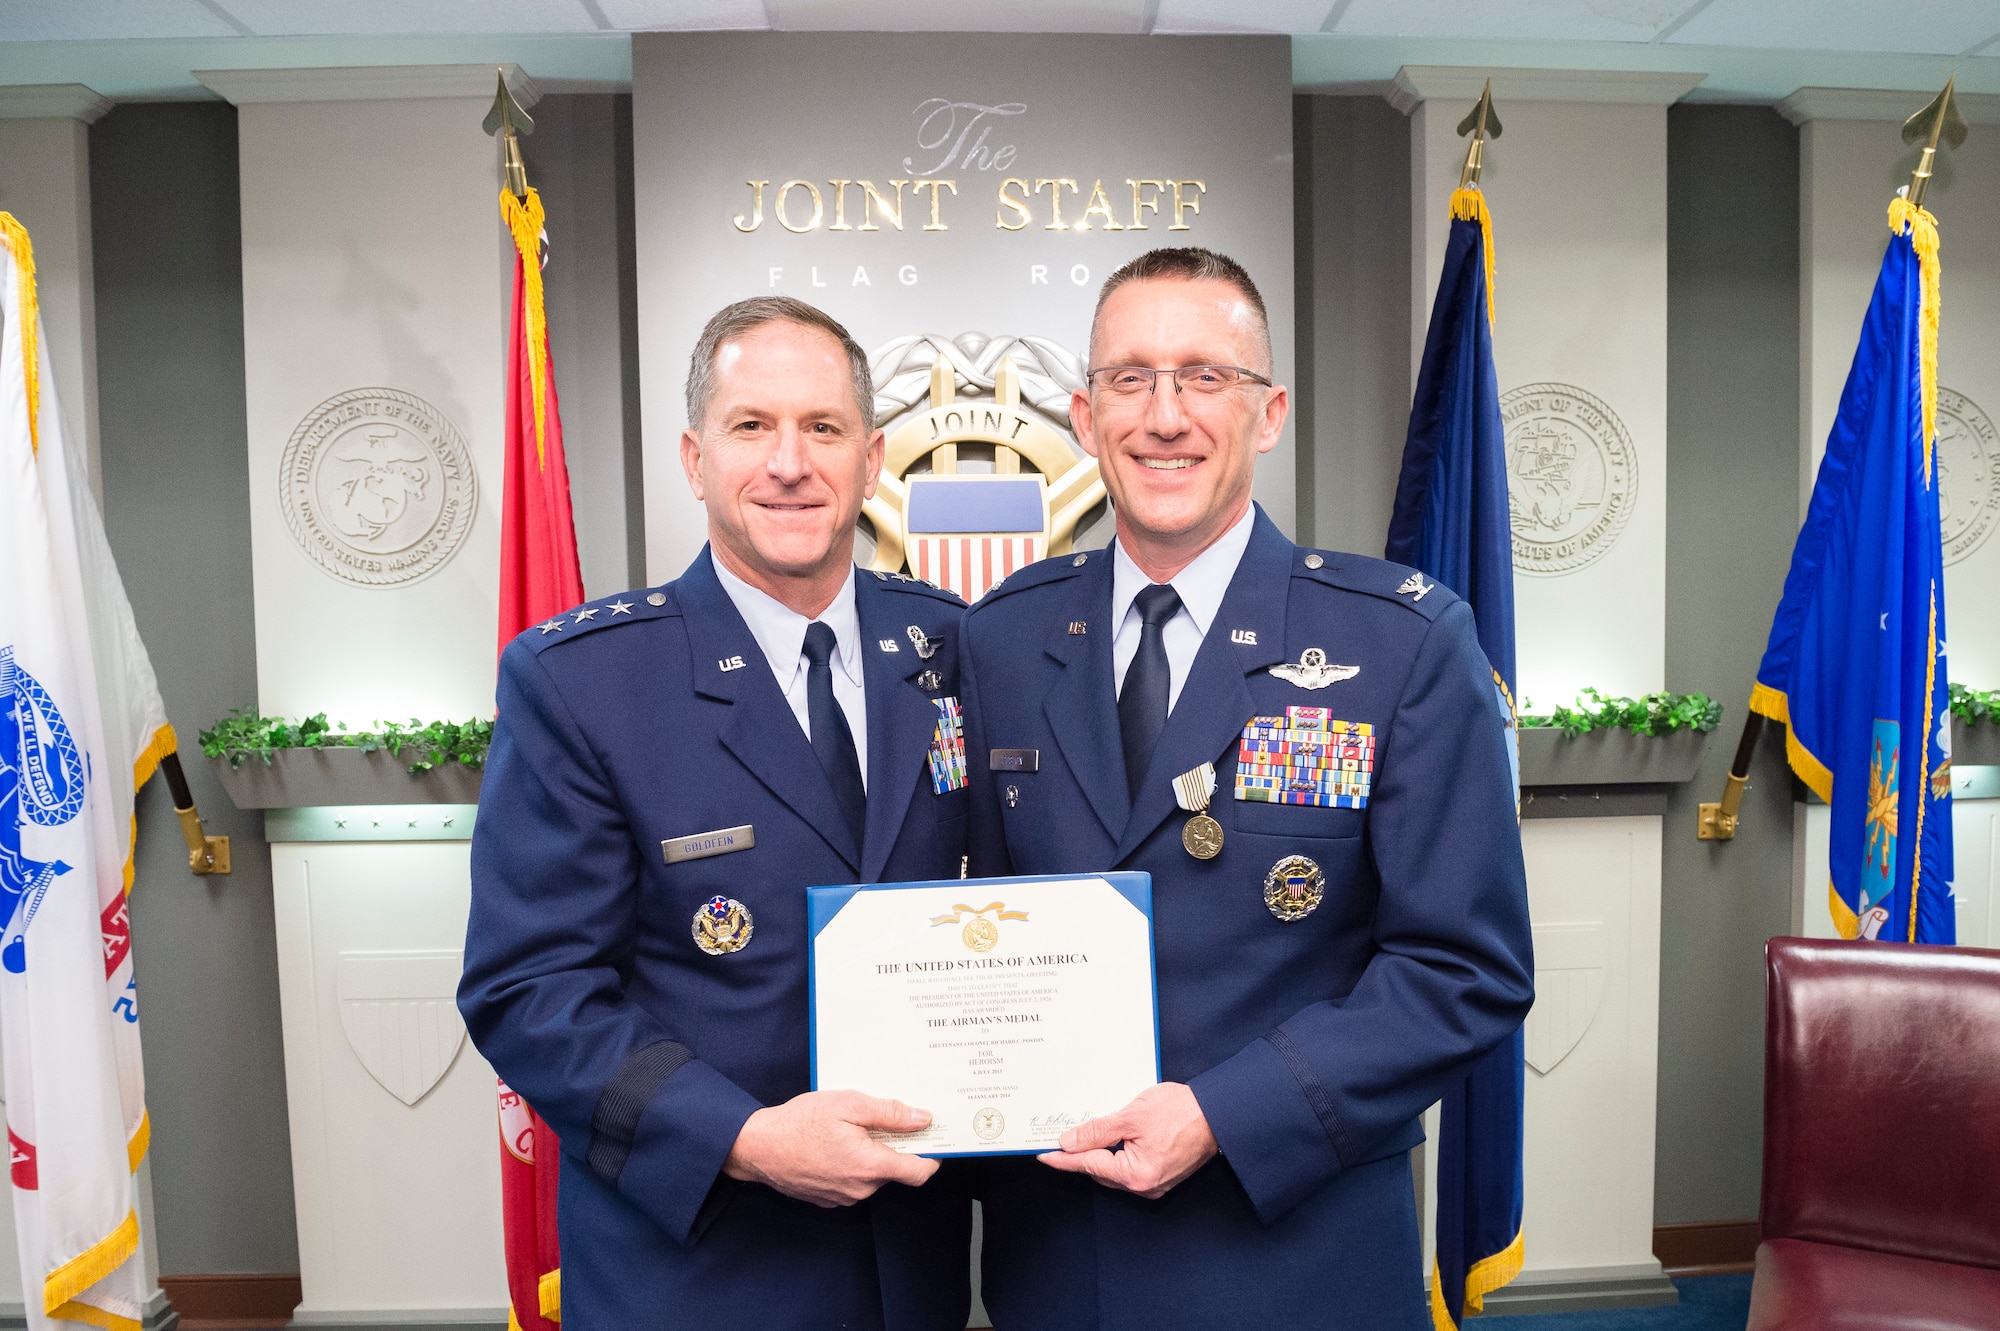 Lt. Gen. David L. Goldfein and Col. Richard Poston pose for a photo Dec. 10, 2014, during Poston’s Airman’s Medal ceremony held at the Pentagon in Washington D.C. Poston was recognized for his heroic actions on July 6, 2013, when he saved a young female from drowning in the Potomac River. Goldfein is the director of the Joint Staff and Poston is the assistant deputy director for political military affairs, strategic plans and policy, J-5 DD-Africa. (Defense Department photo/ U.S. Army Staff Sgt. Sean K. Harp)